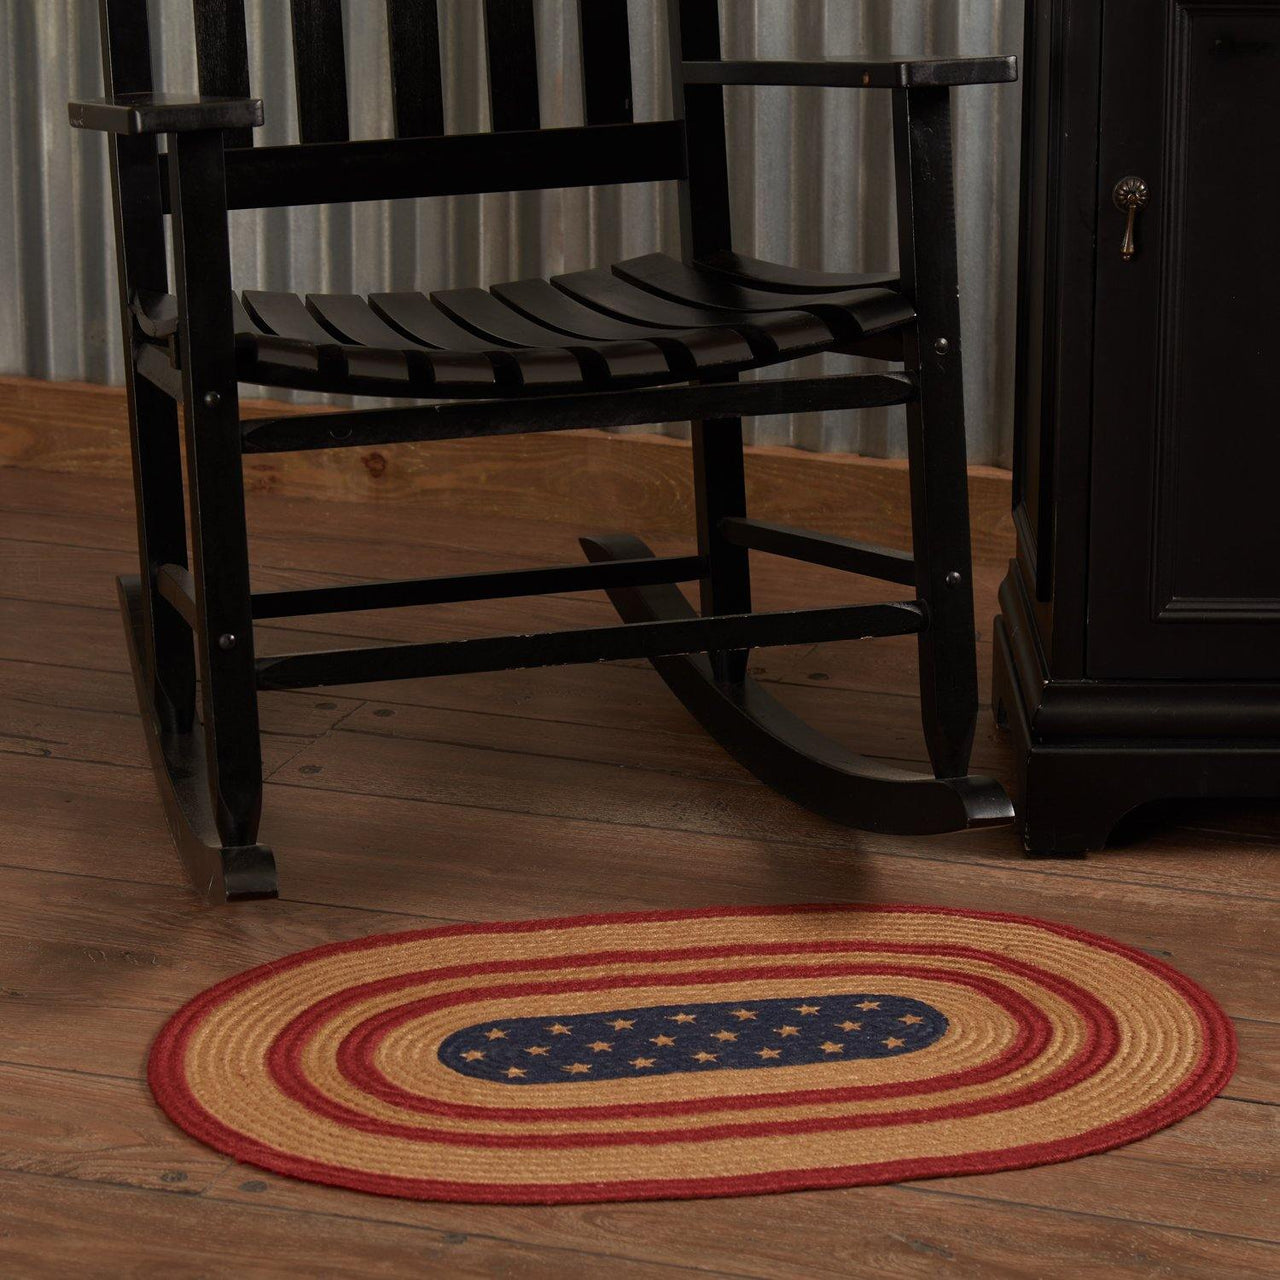 Liberty Stars Flag Jute Braided Rug Oval 20"x30" with Rug Pad VHC Brands - The Fox Decor